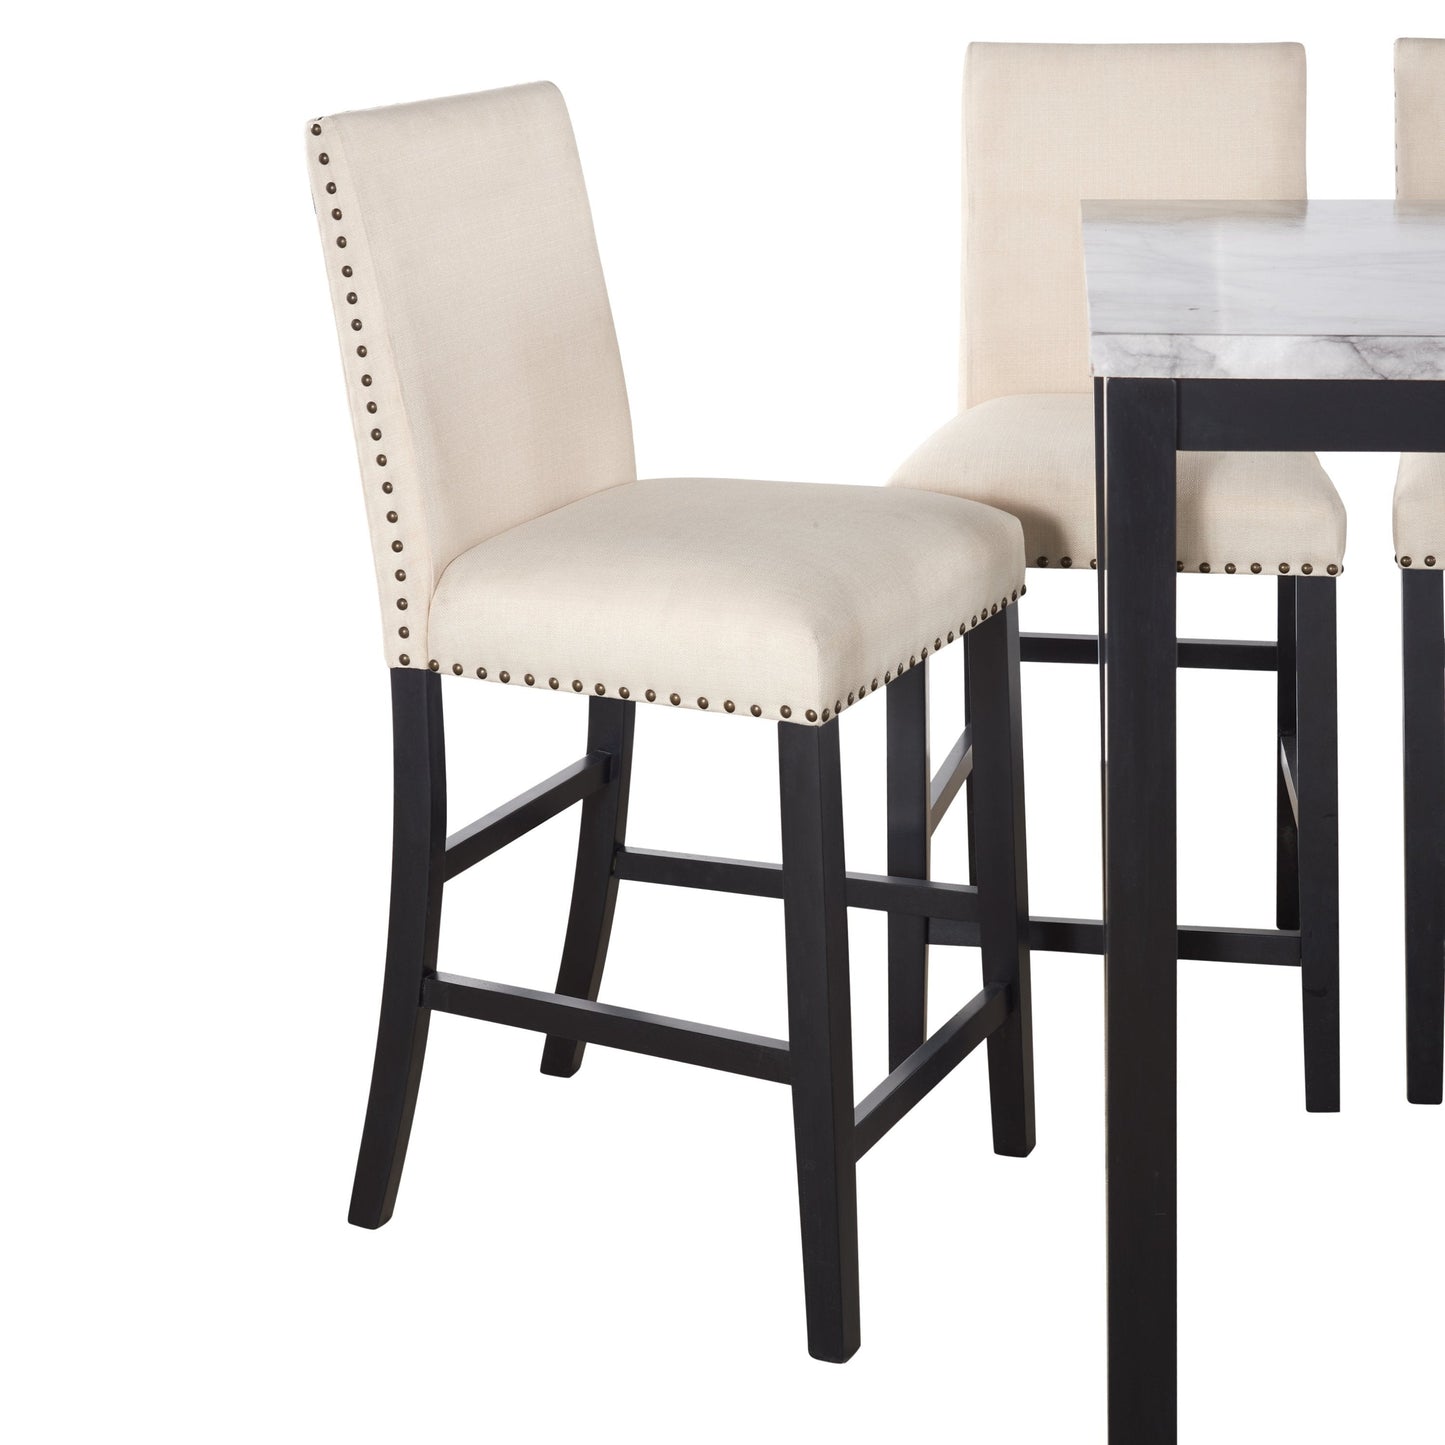 Genoa Beige 5 Piece Counter Height Faux Marble Modern Dining Set